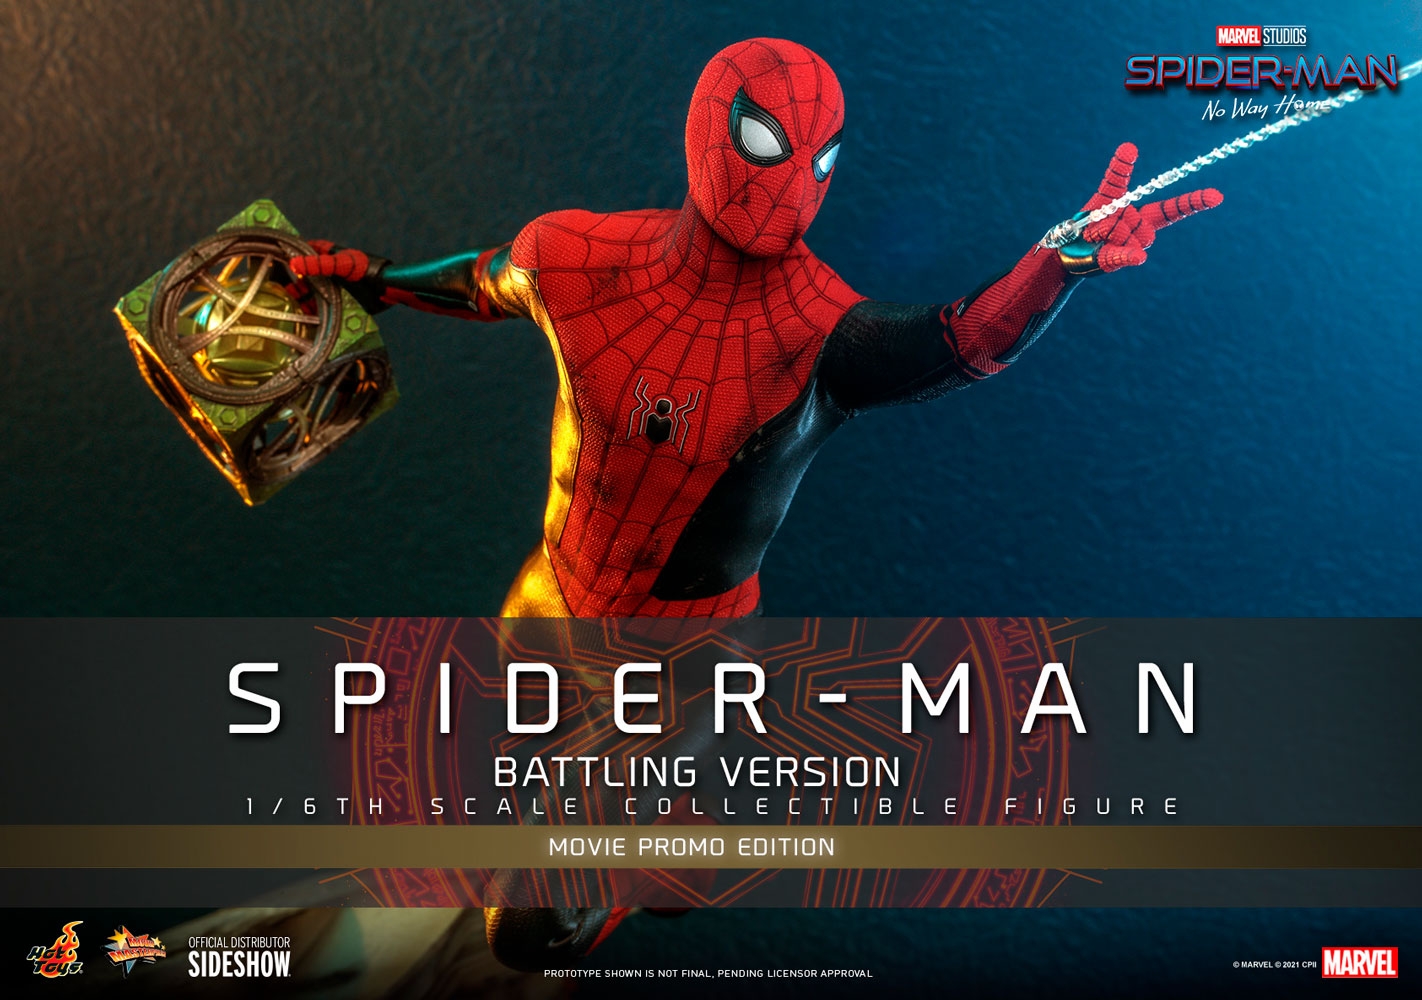 spider-man-movie-promo-edition-sixth-scale-figure-by-hot-toys_marvel_gallery_61a51d9162780.jpg